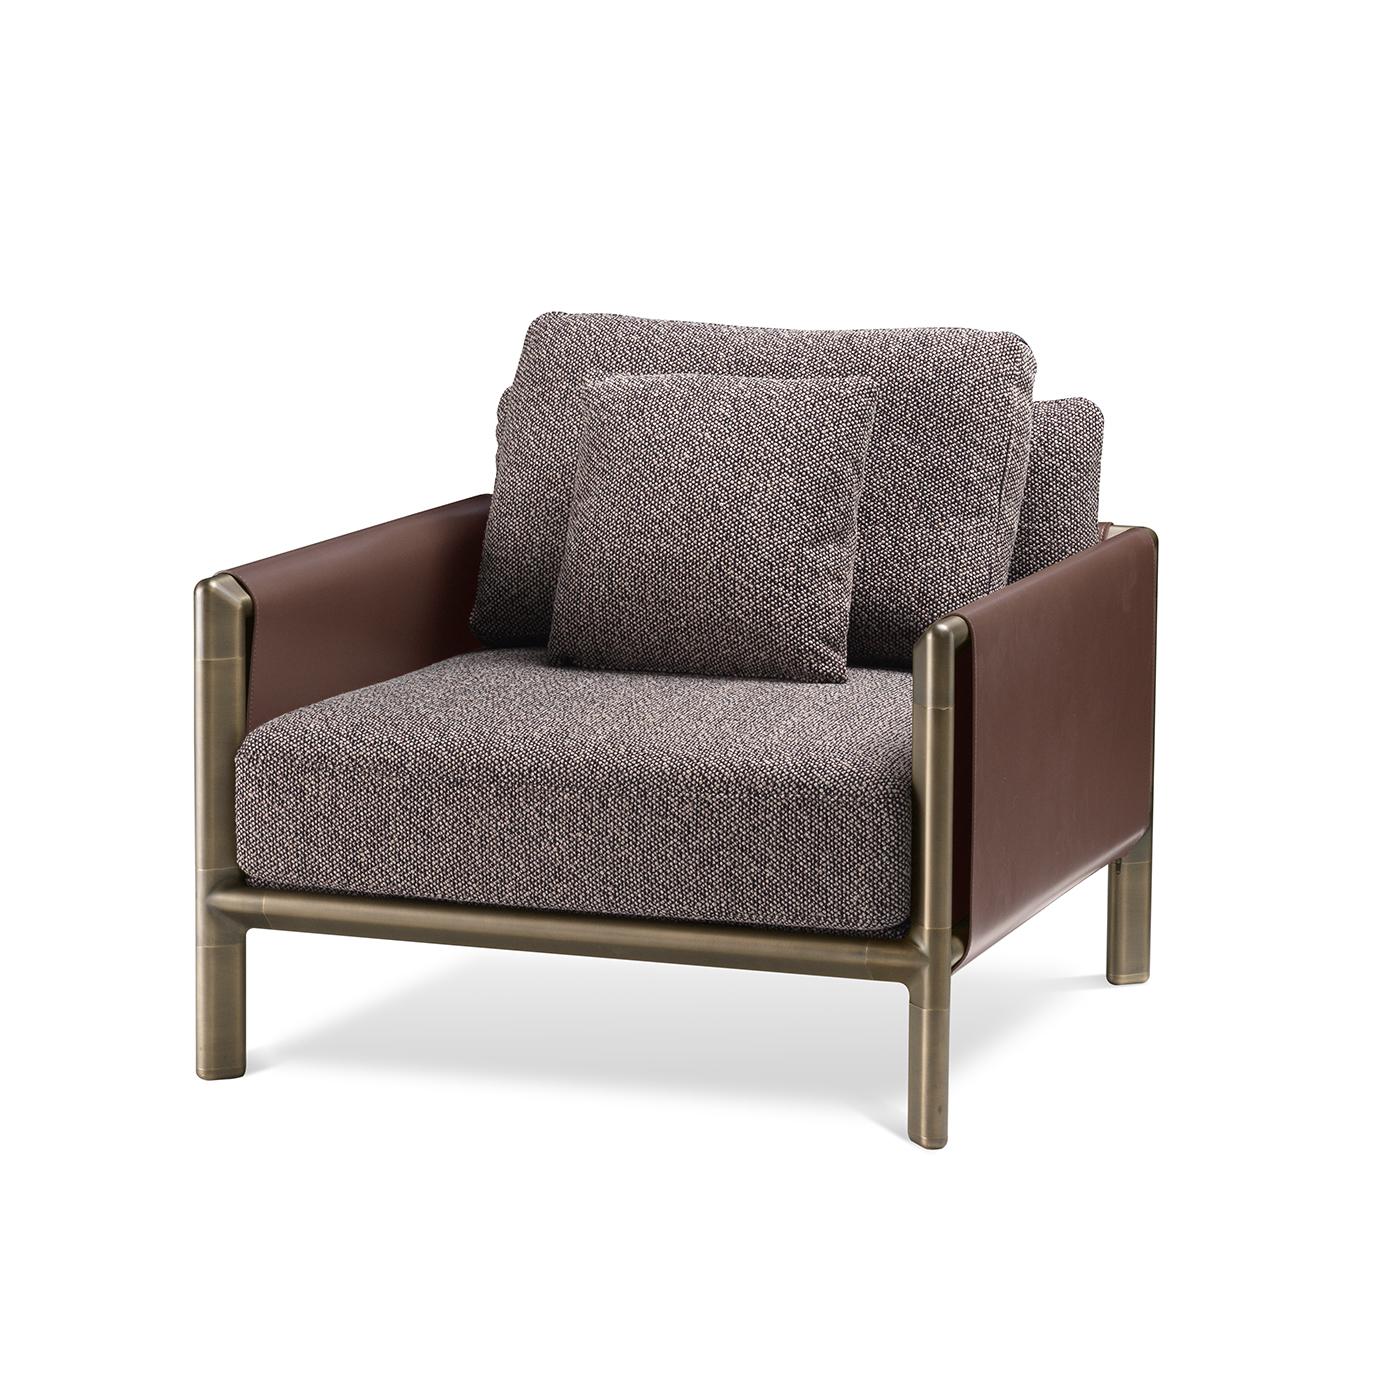 Classic inspiration and modern flair exquisitely merge in this refined design: a minimal, compact, and bold armchair fashioned of high-quality materials. Resting on a brass structure marked by thick and straight lines, it is enriched with two